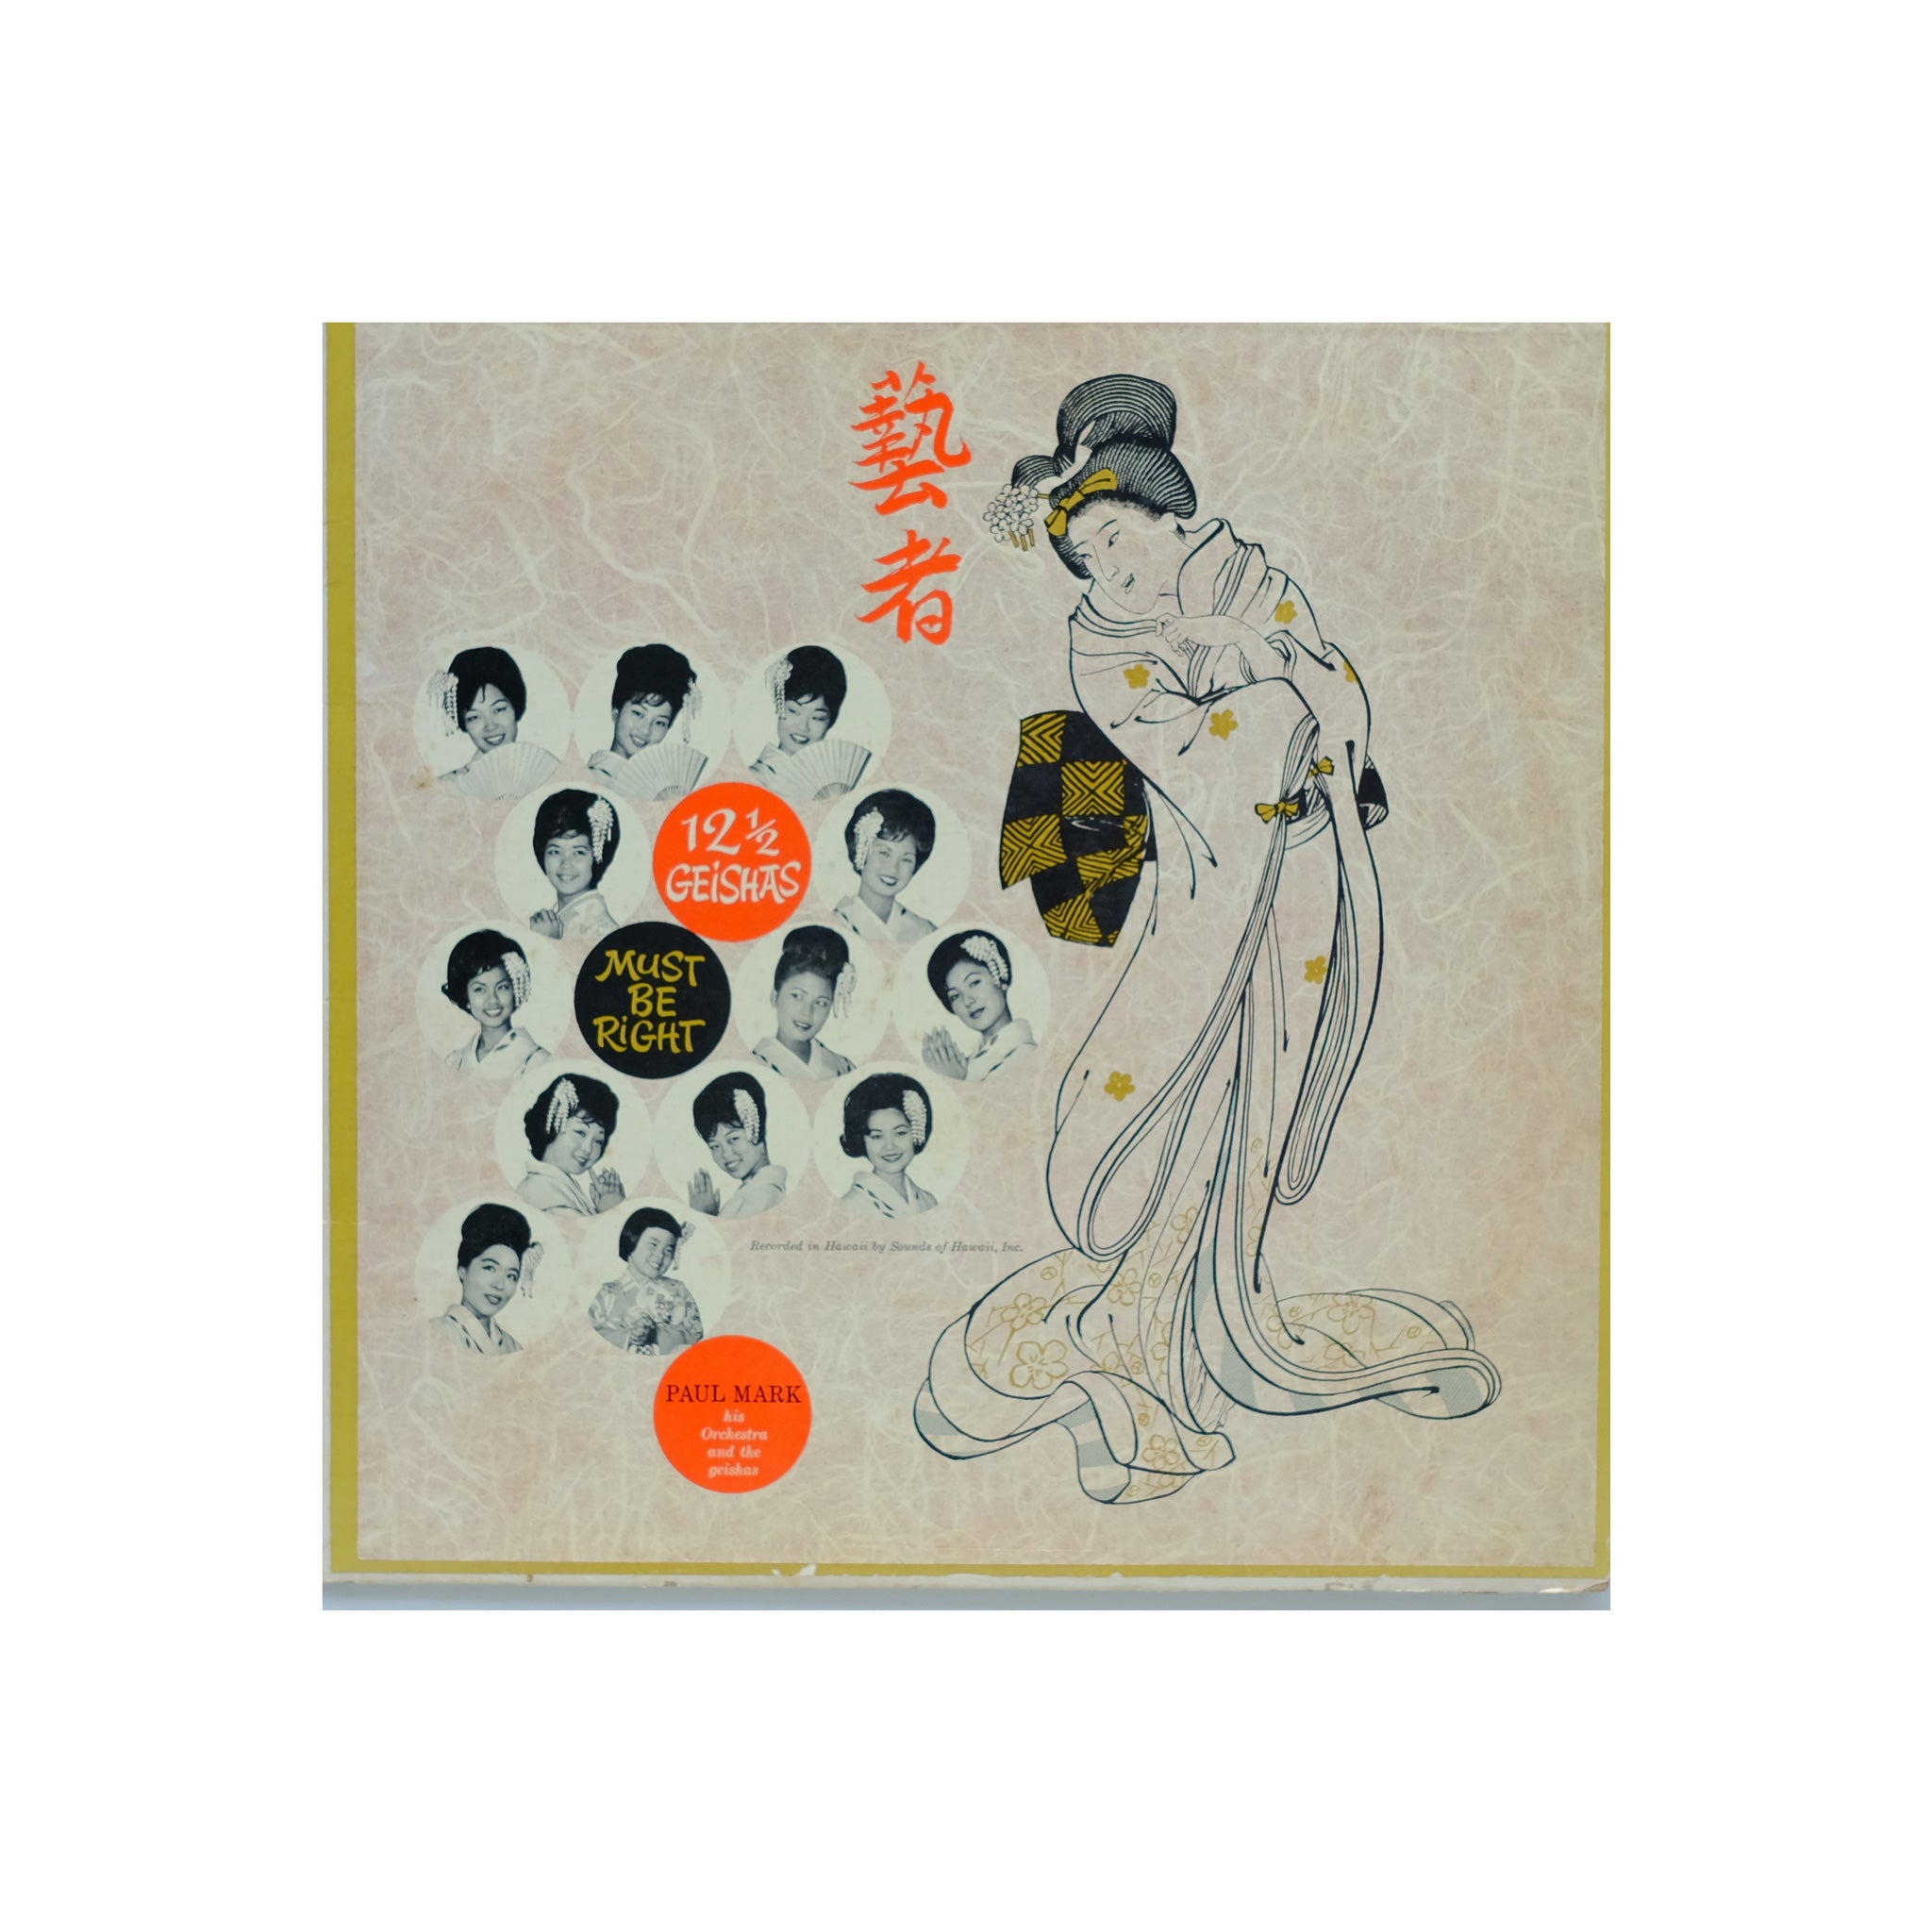 Paul Mark And His Orchestra And The Geishas - 12 1/2 Geishas Must Be Right